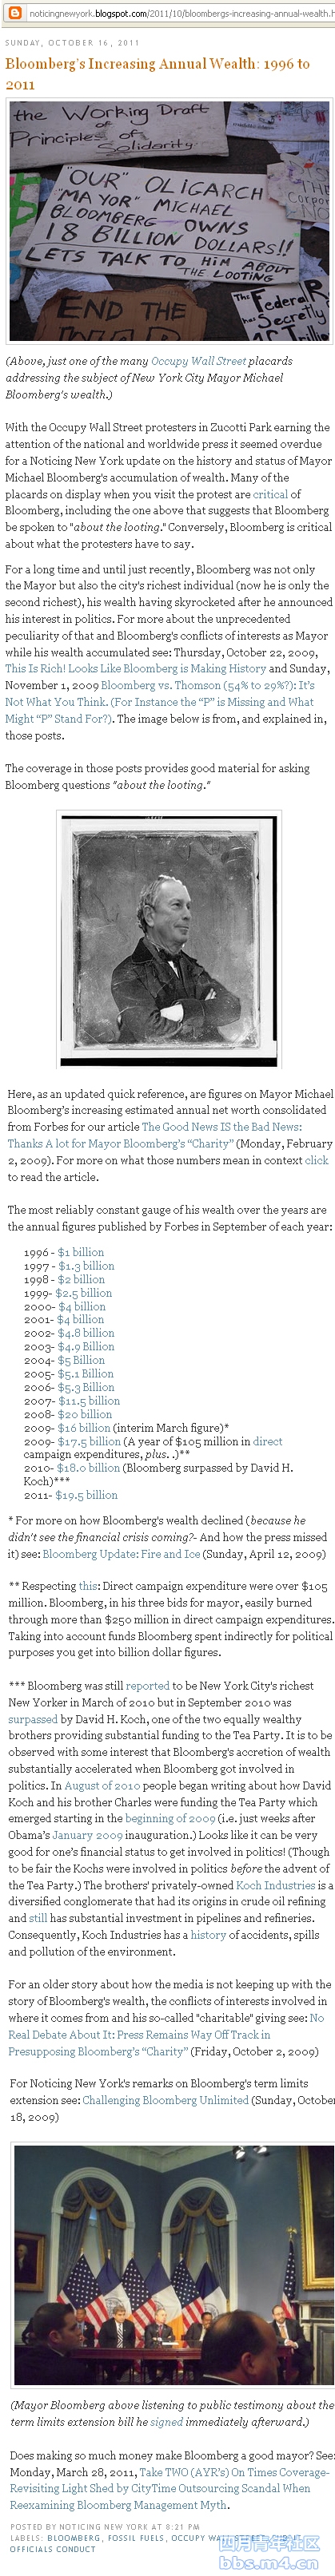 Bloomberg Increasing Annual Wealth_Noticing_NY_2011_Oct_16.jpg